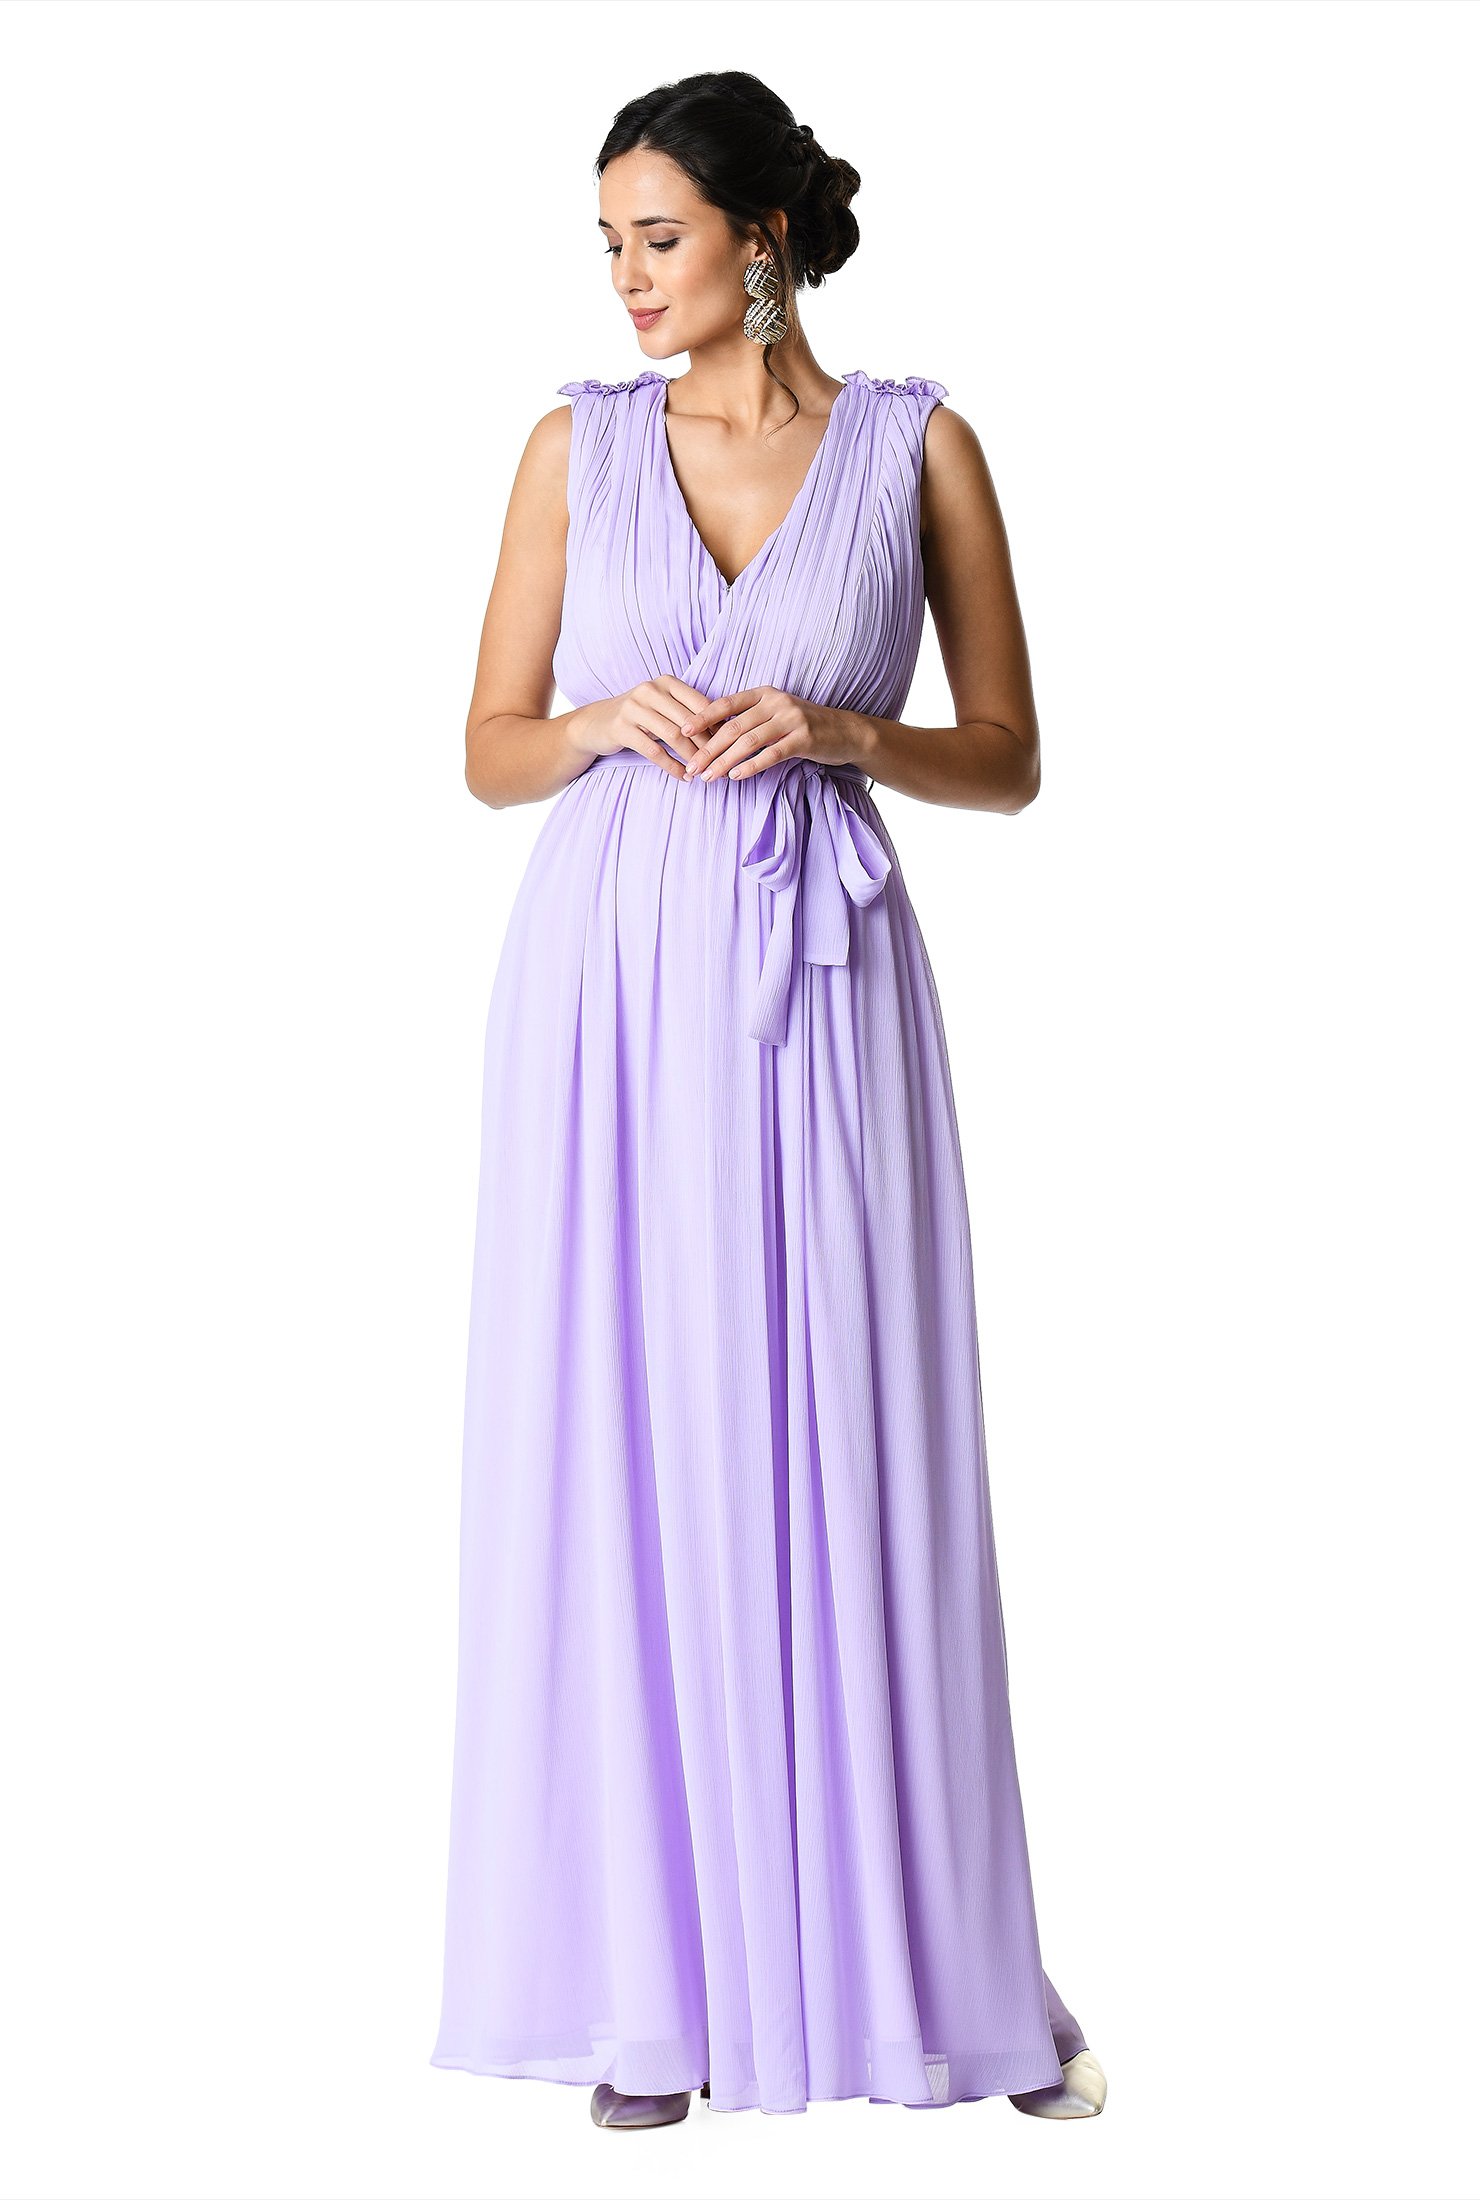 chiffon gowns and tops